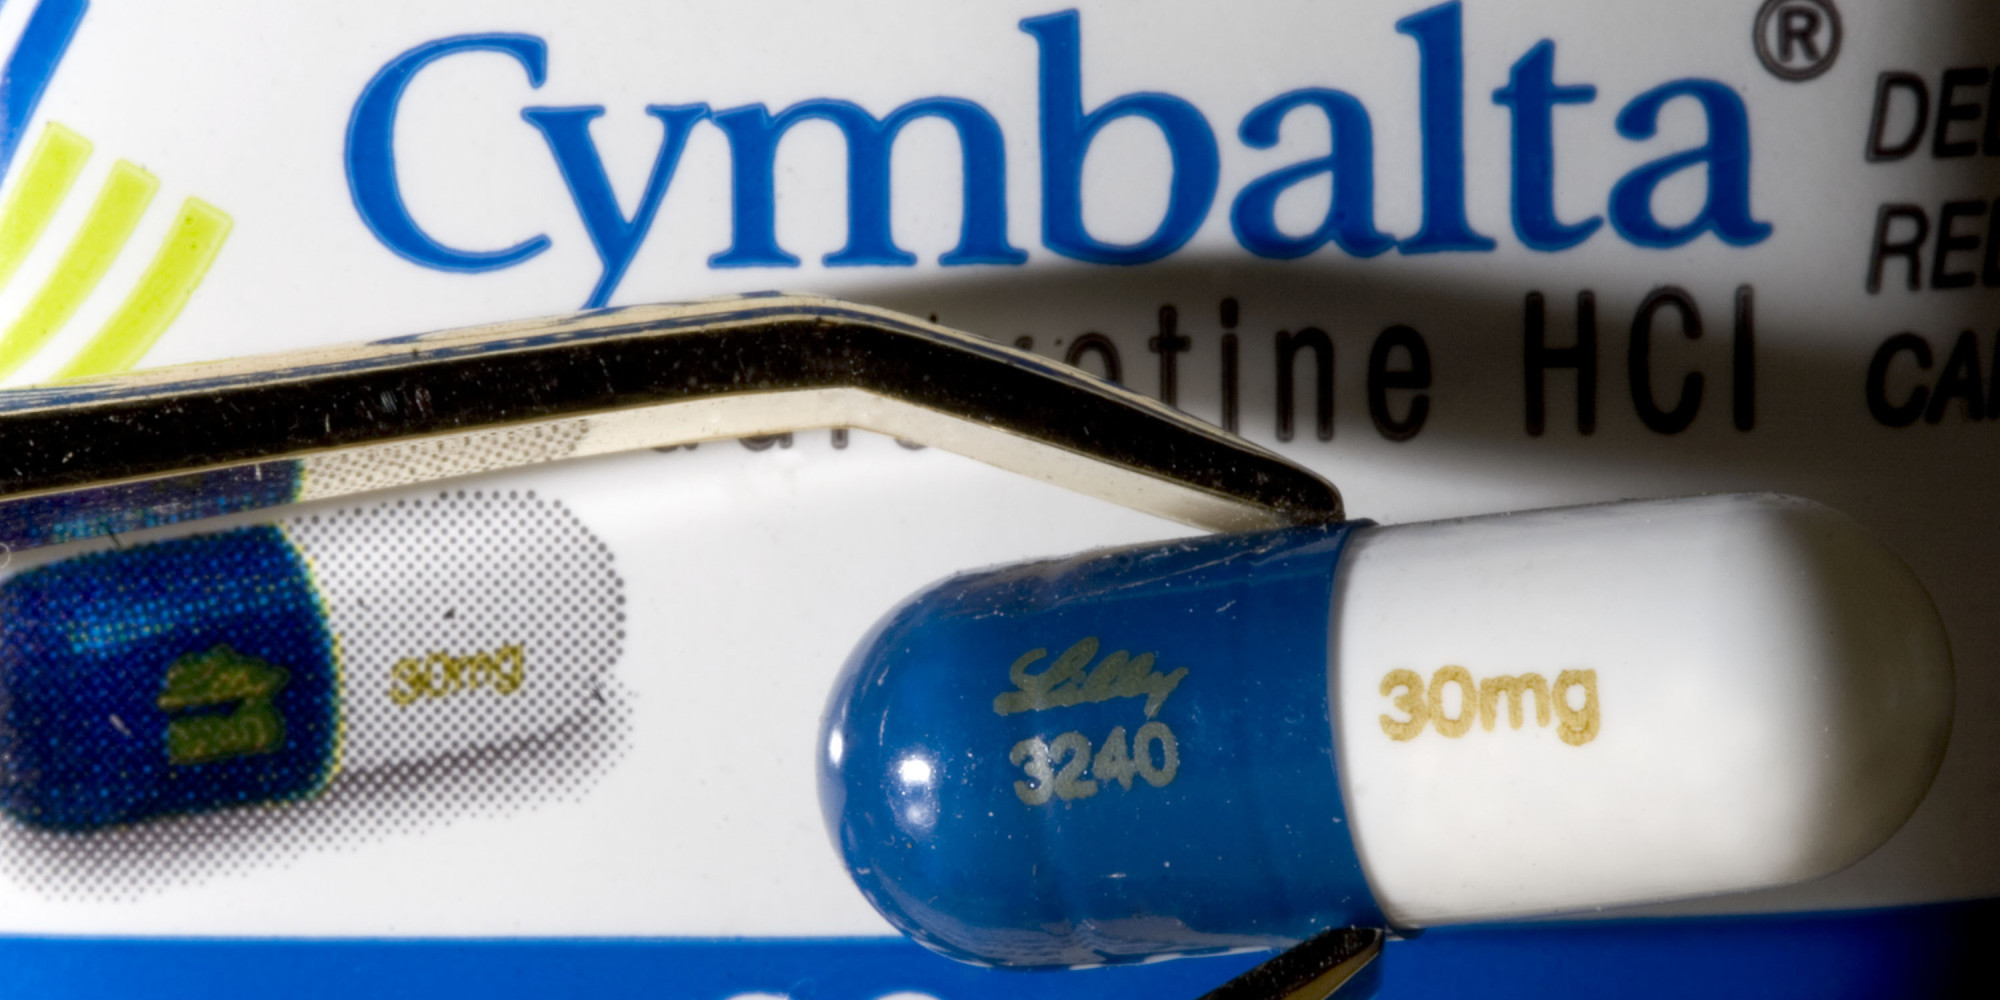 Generic Version Of Cymbalta Antidepressant Approved By FDA